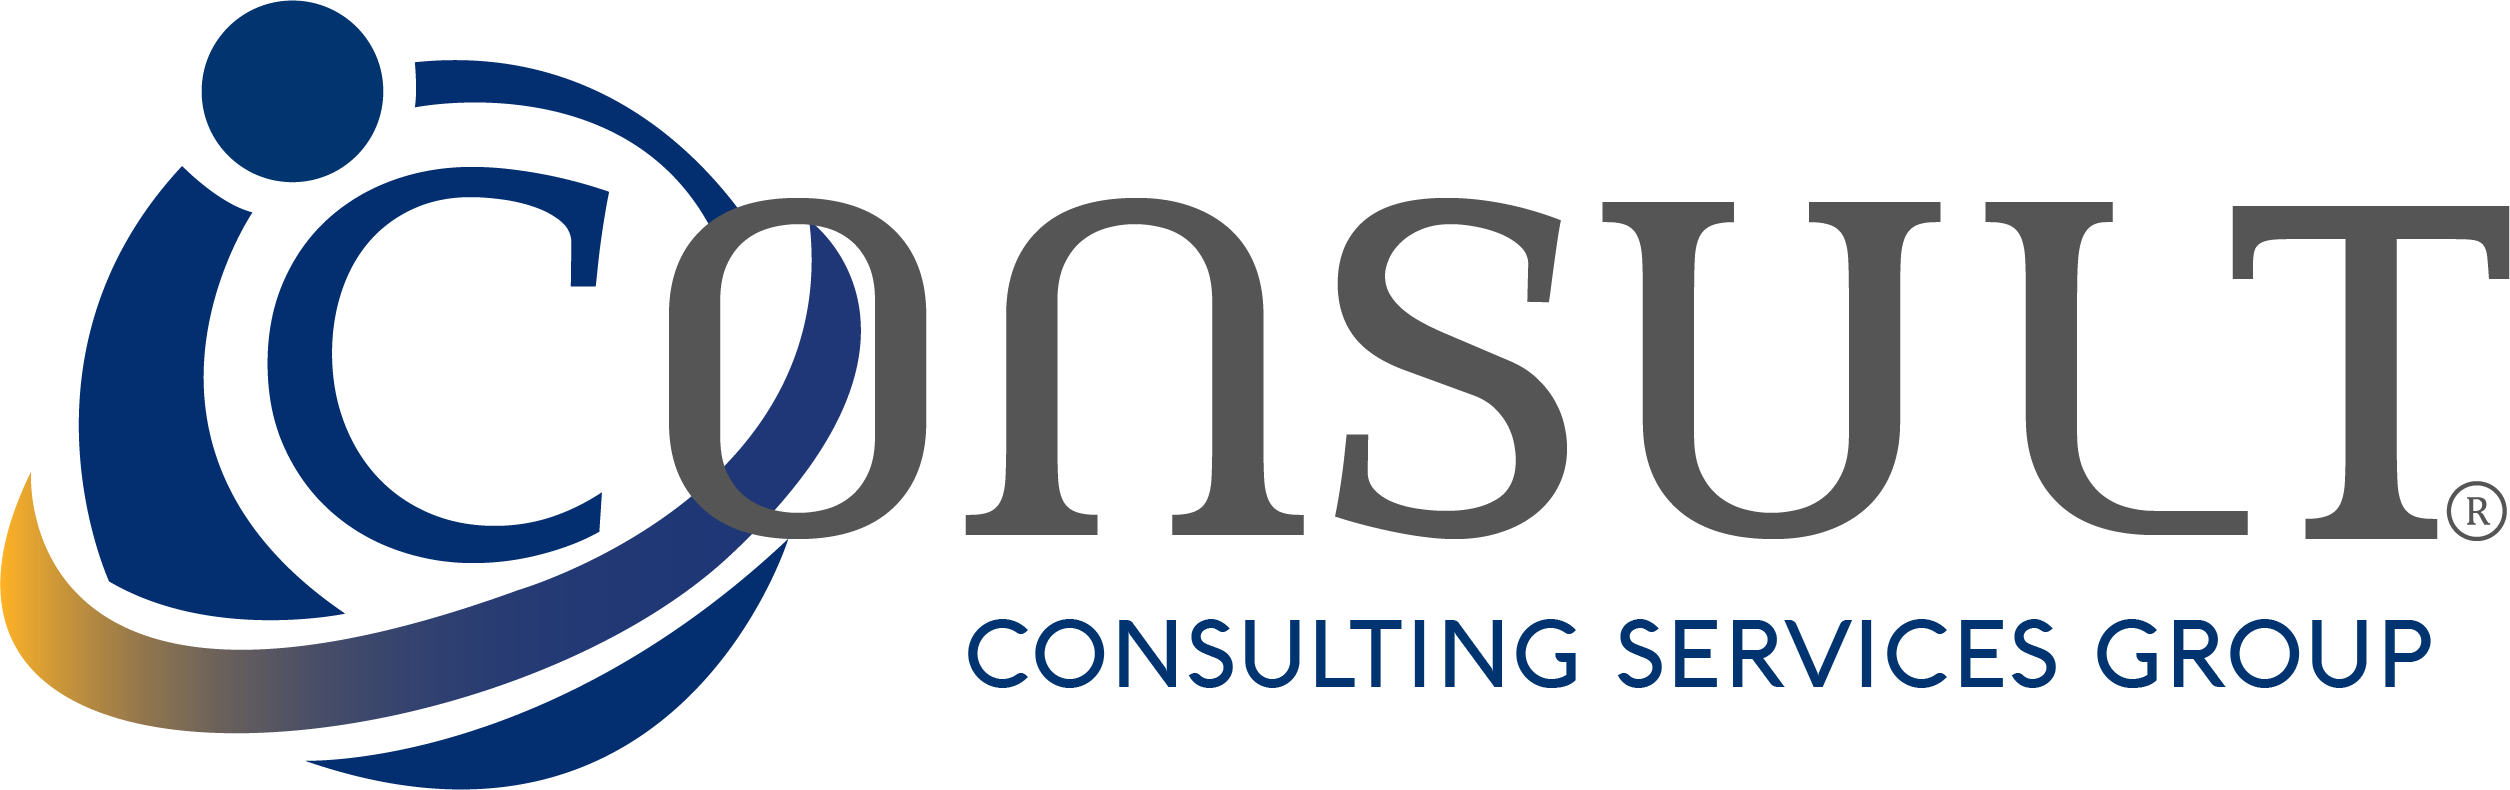 CONSULT - Consulting Services Group